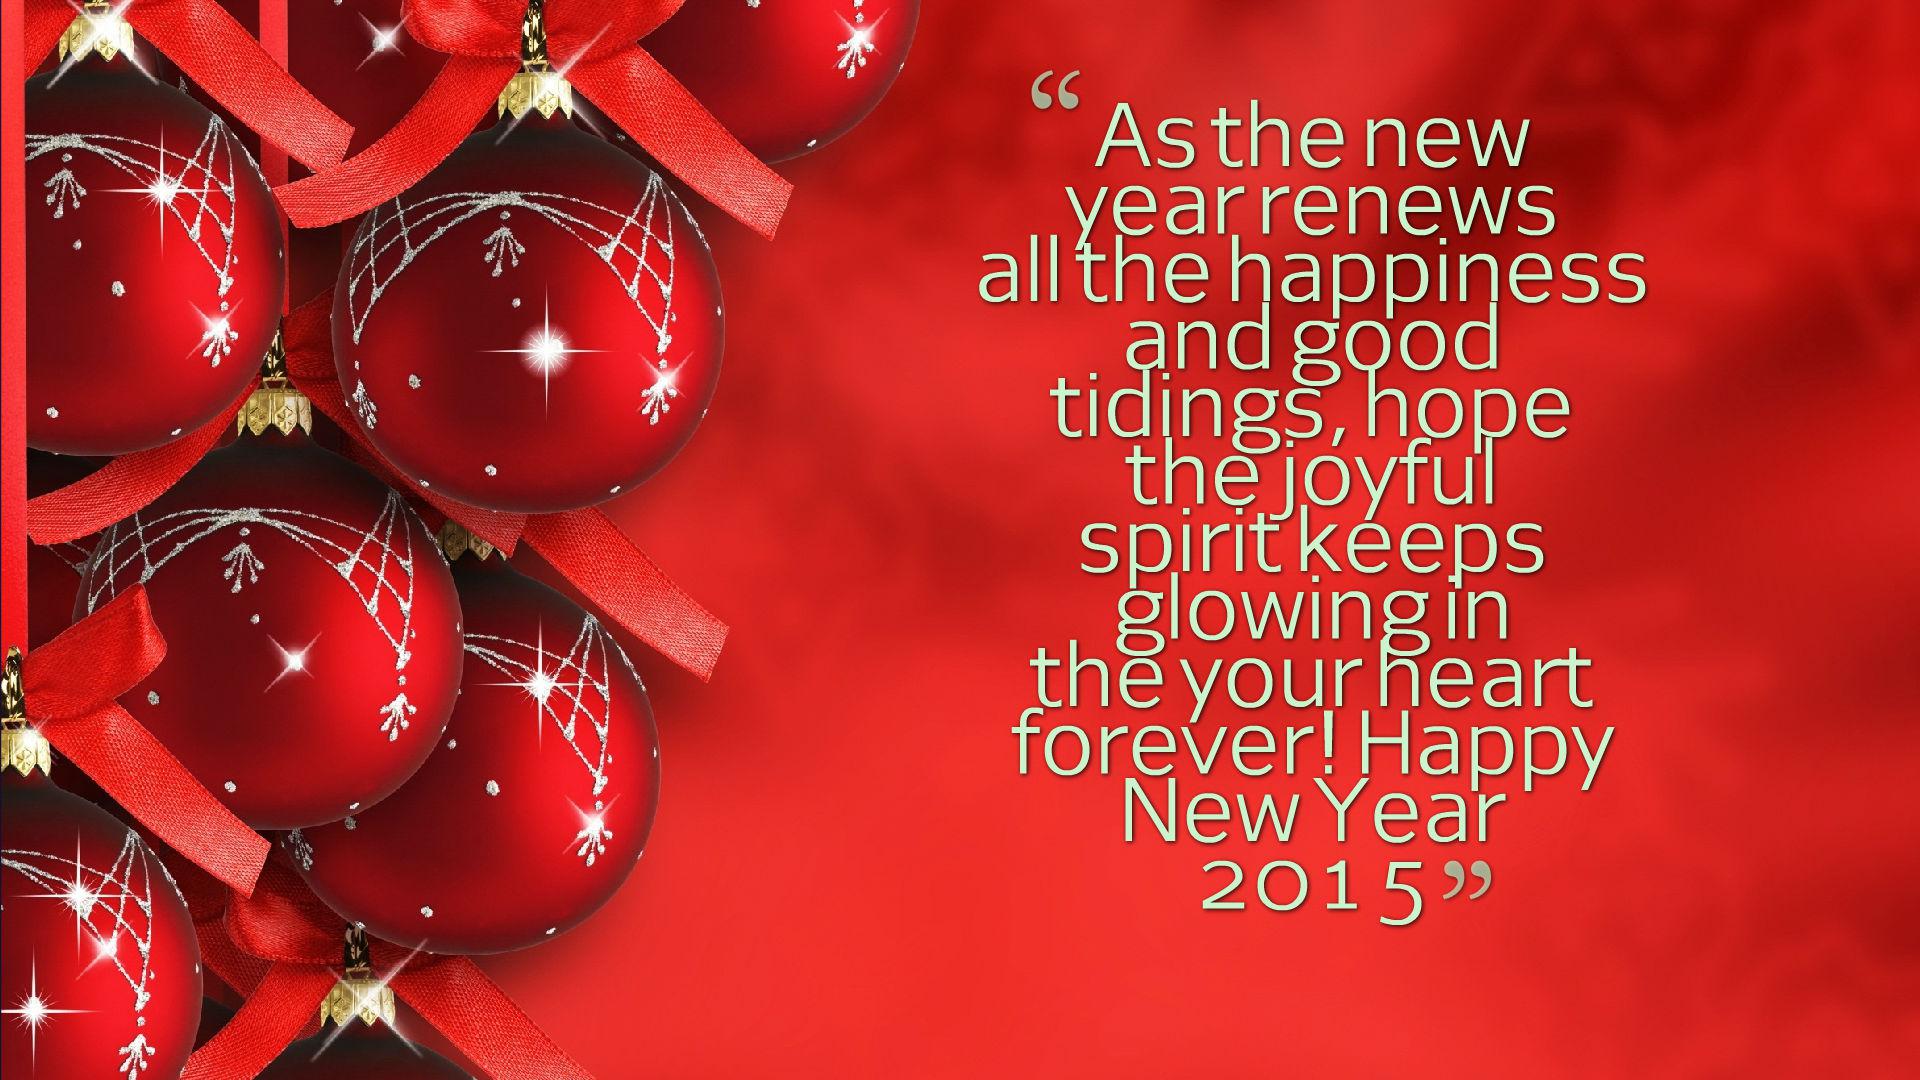 Happy New Year 2015 Quotes For Facebook. QuotesGram